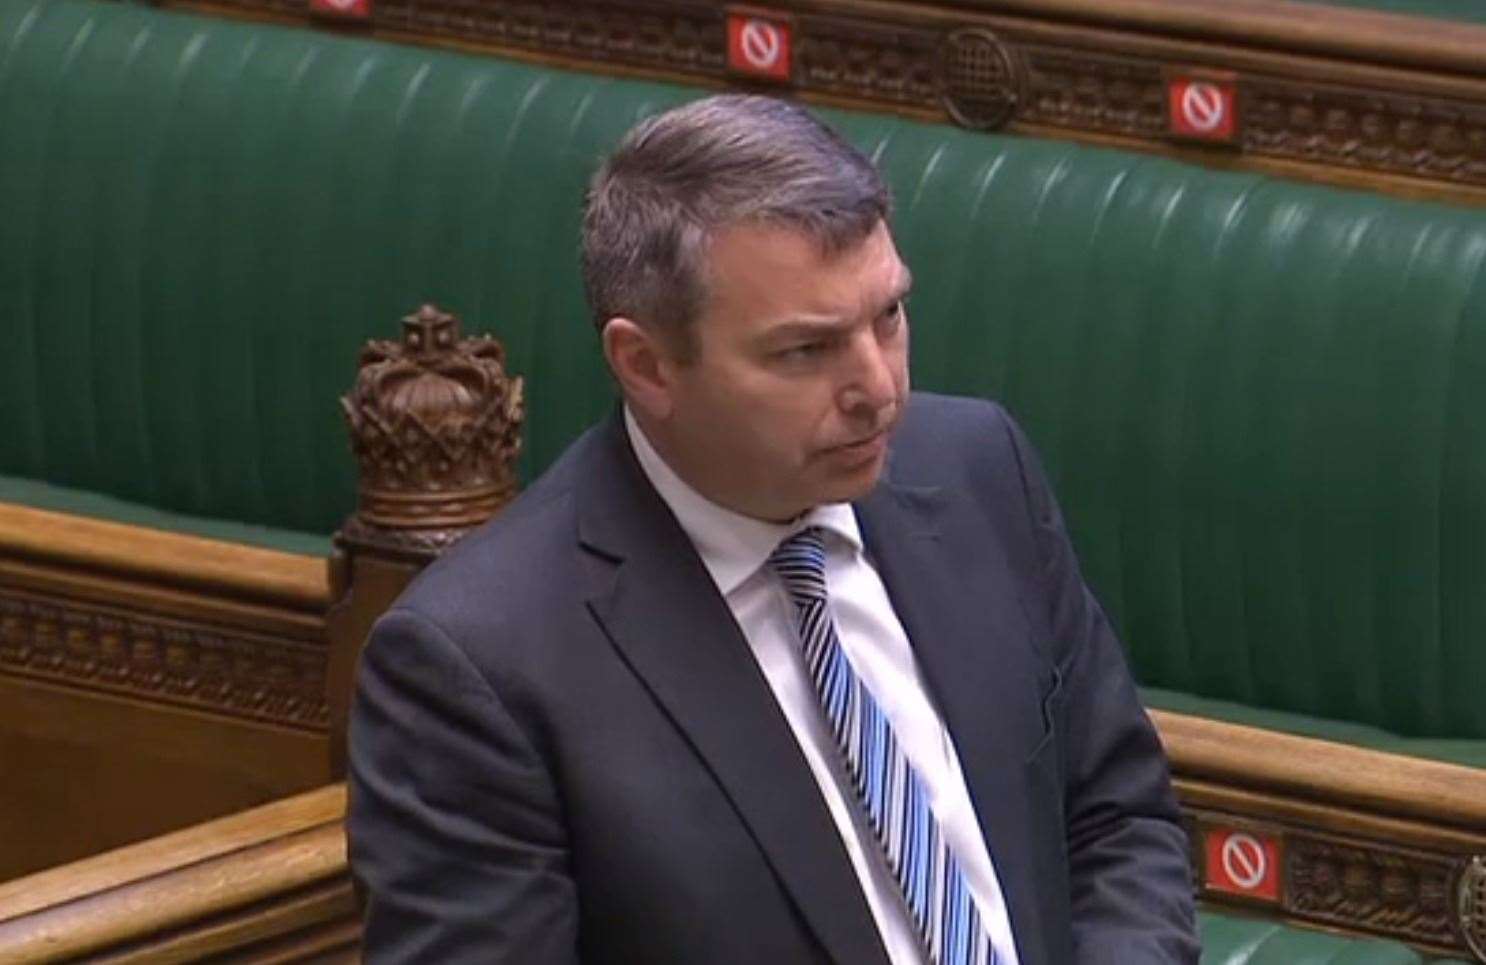 Dartford MP Gareth Johnson defended the government's spending record throughout the pandemic which he said had been "generous" photo: Parliament TV